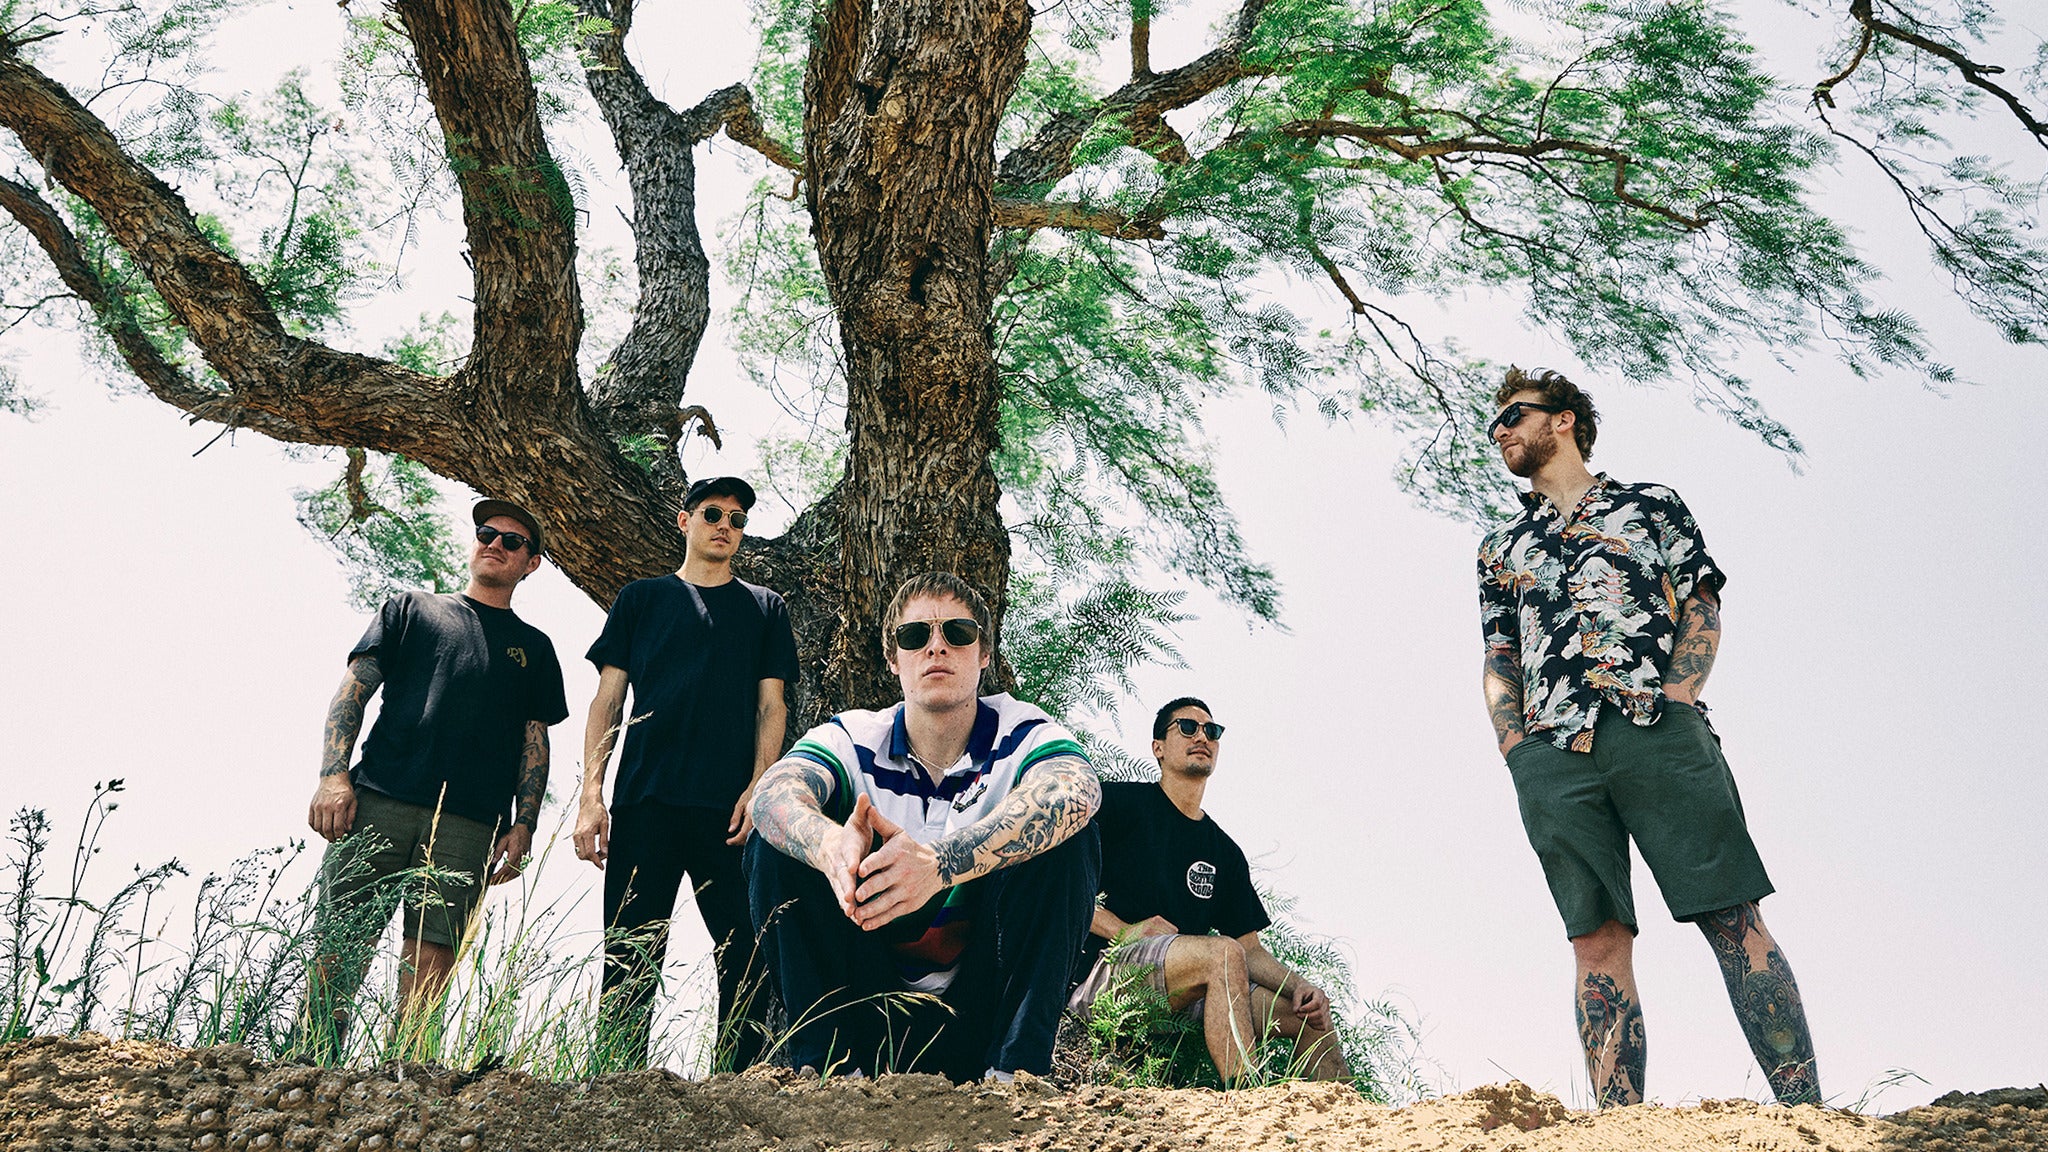 The Story So Far W/ the Frights, Hunny & Just Friends in Anaheim promo photo for Live Nation Mobile App presale offer code